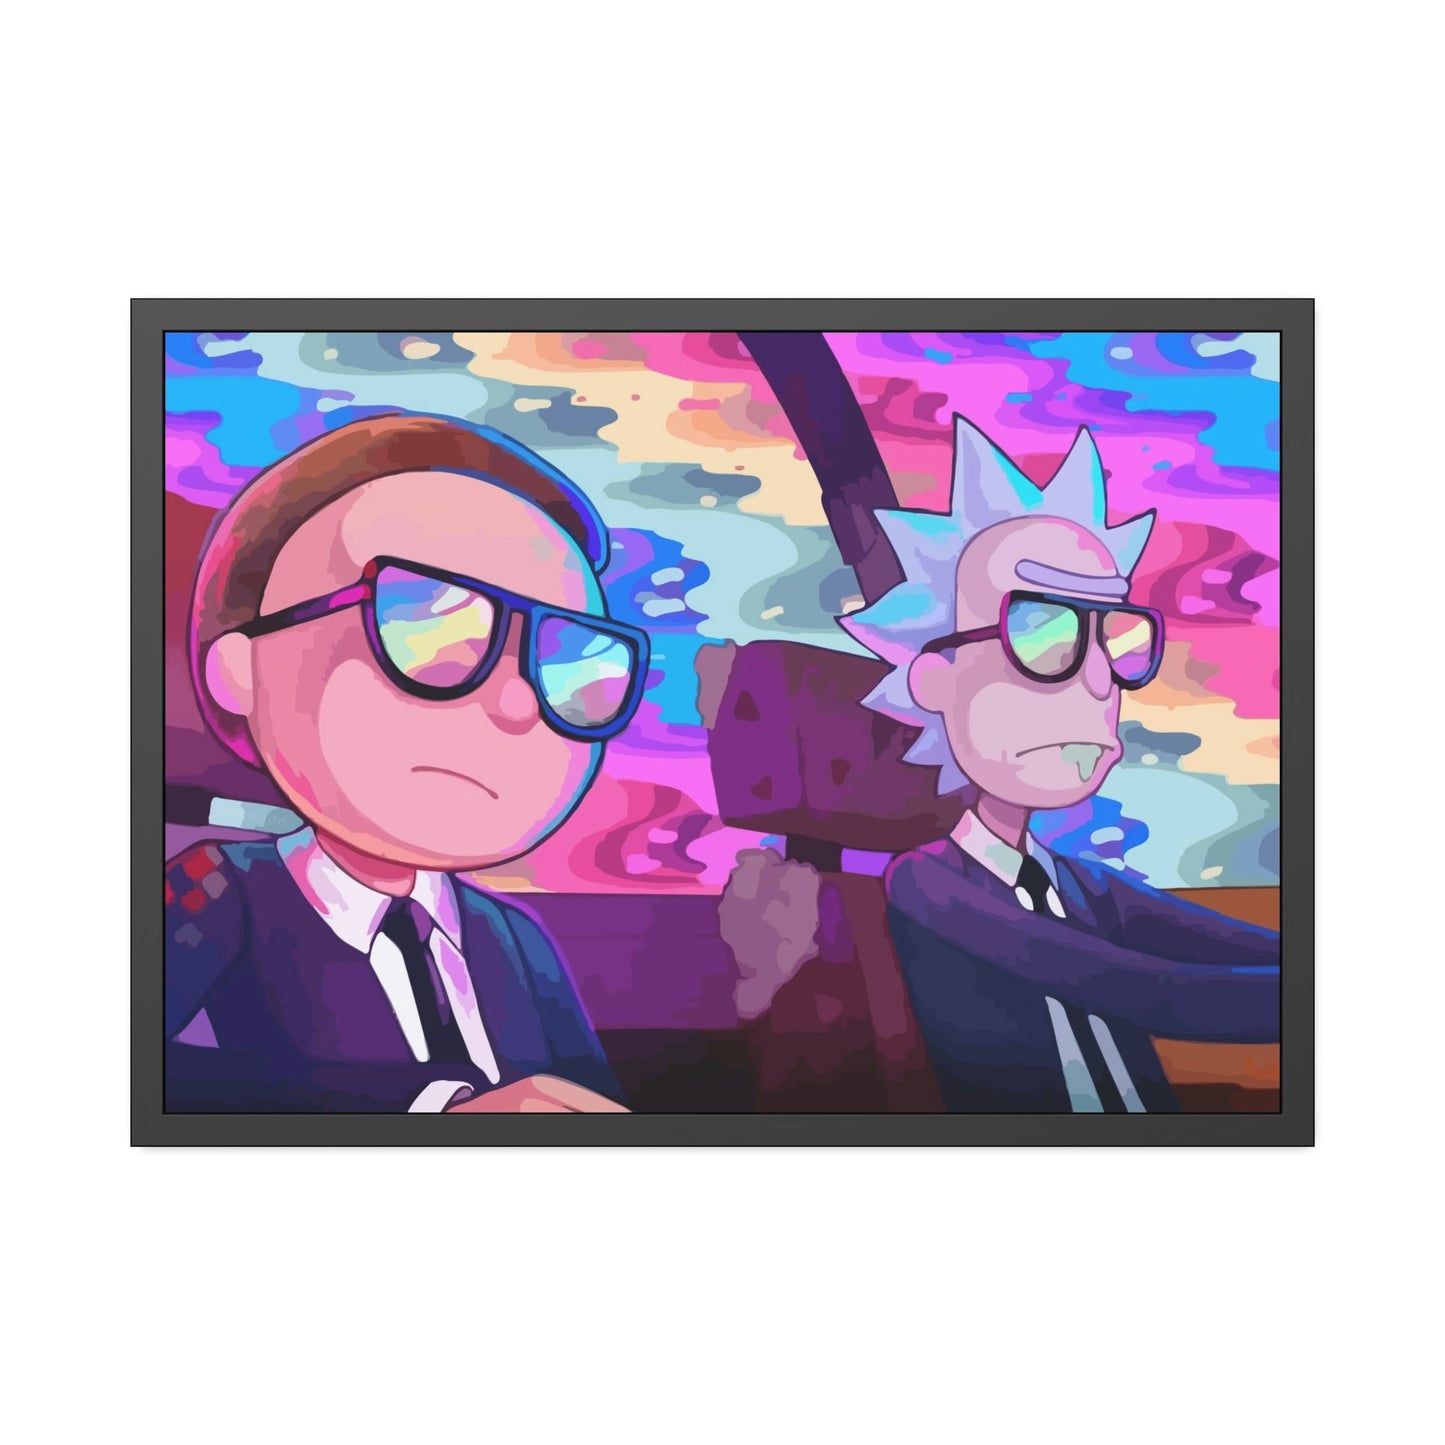 Sci-Fi Adventures: Framed Canvas Wall Art Featuring Rick and Morty Cartoon Characters